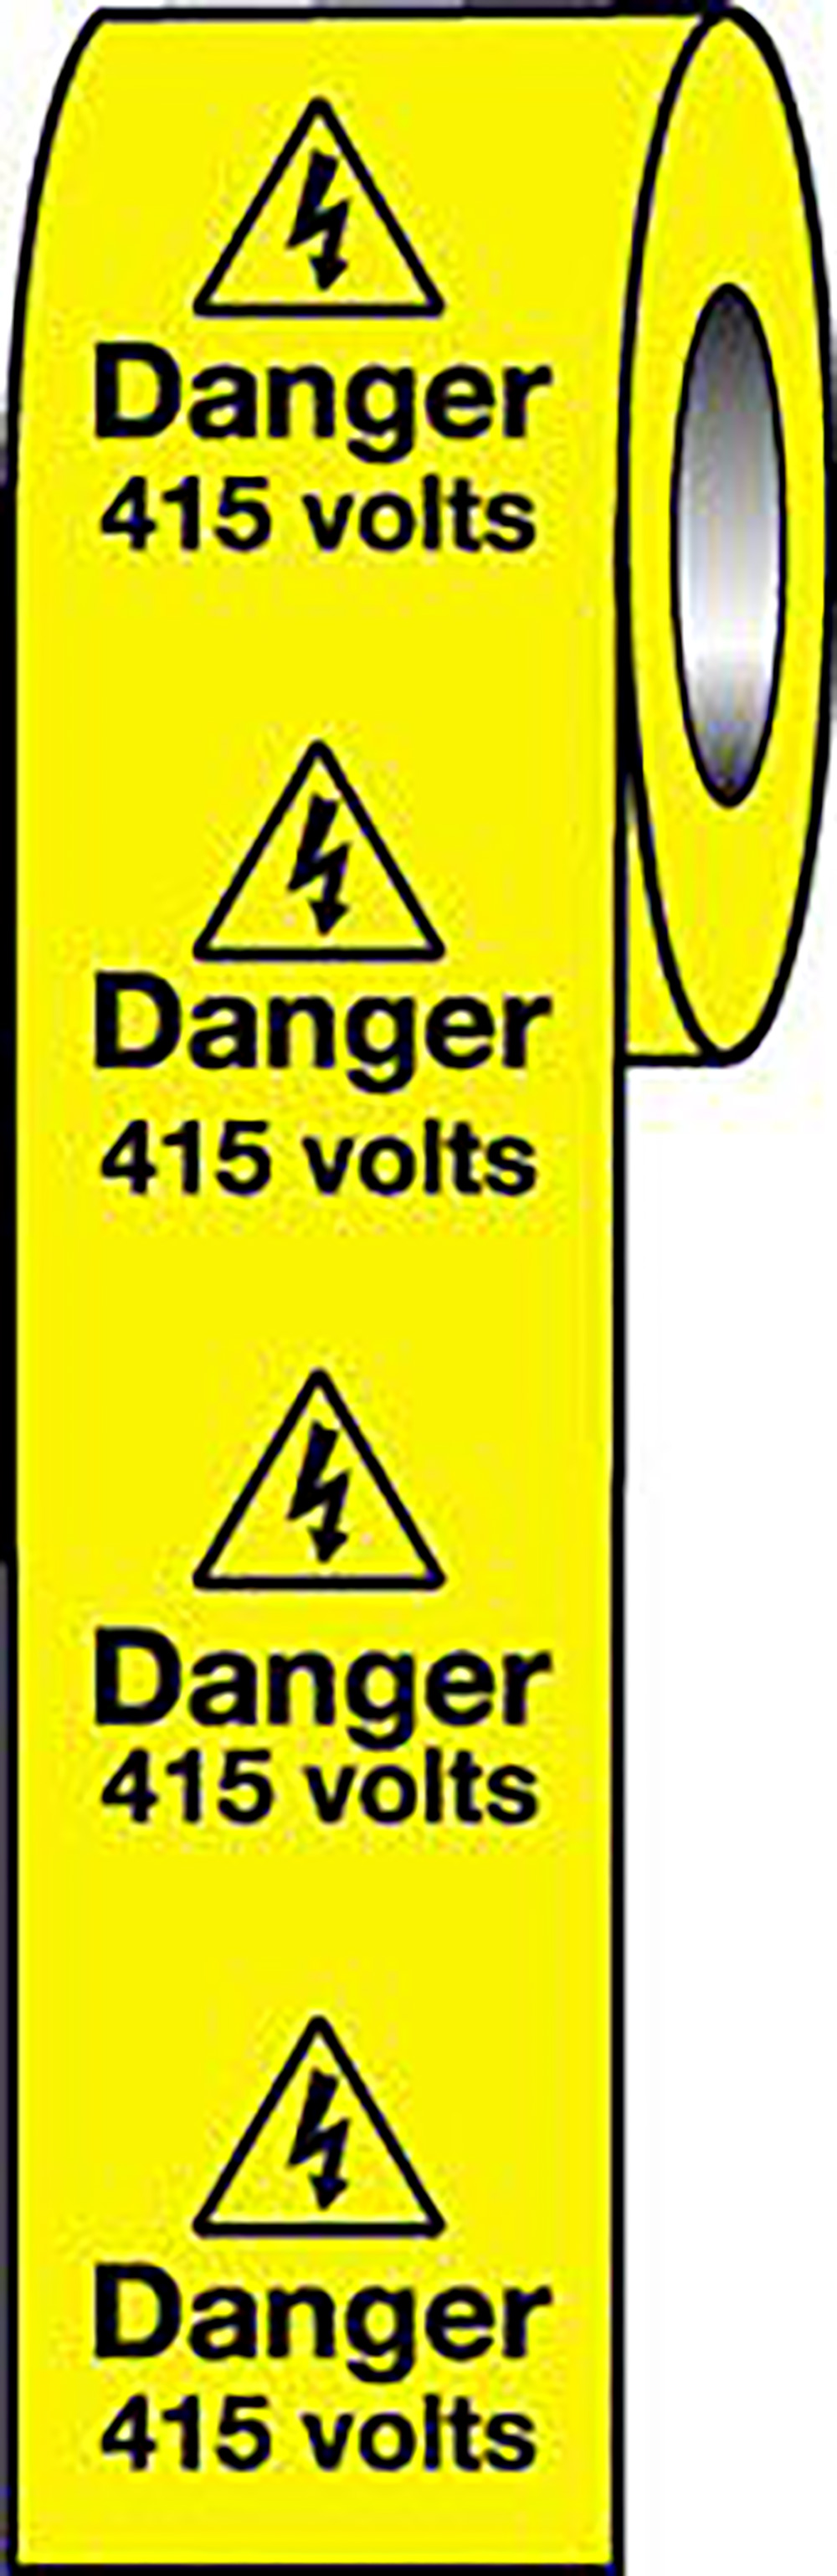 Danger 415 Volts 50 x 50mm Self Adhesive Vinyl Safety Sign - 250